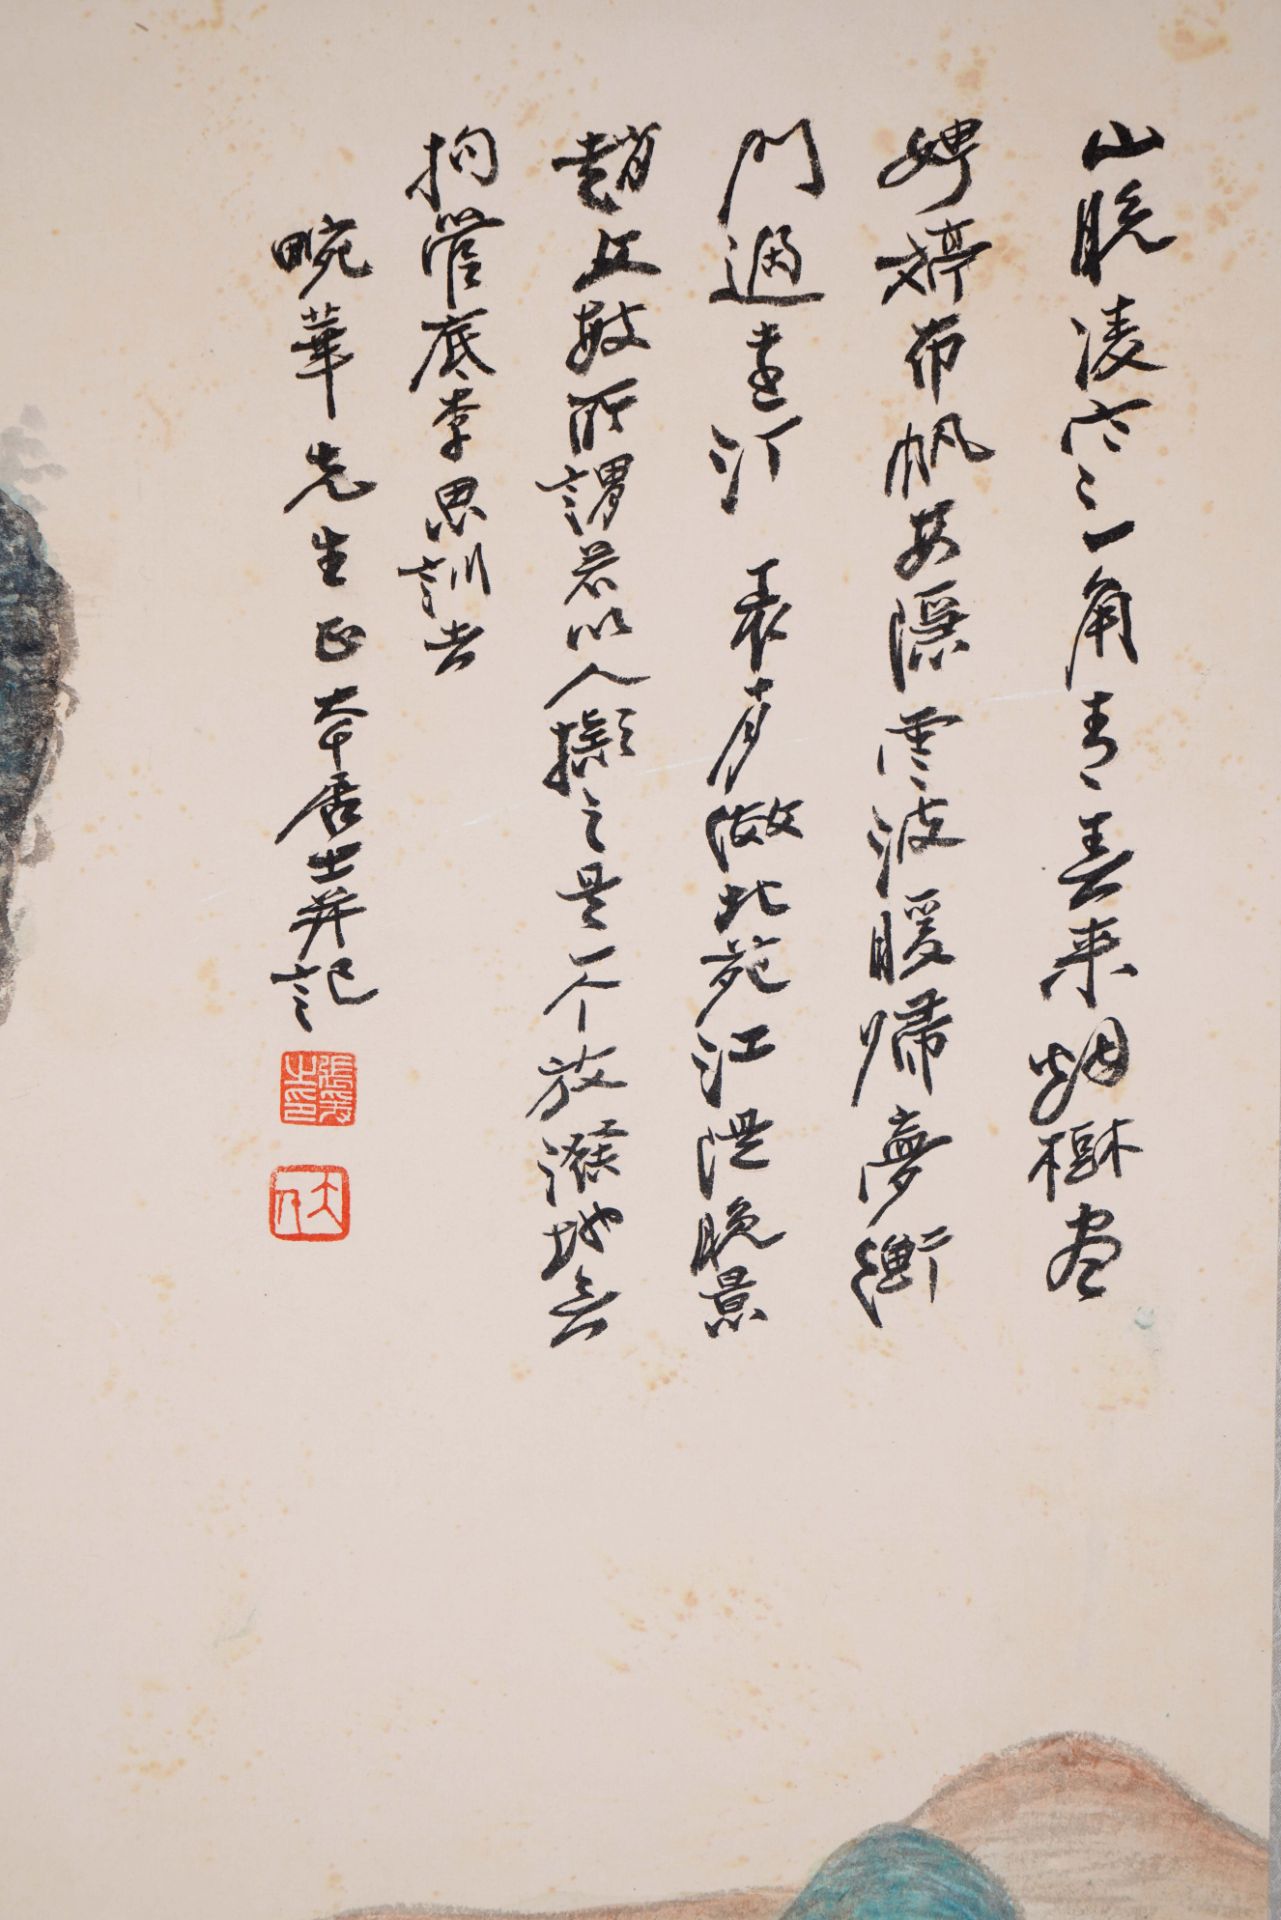 A Chinese Scroll Painting by Zhang Daqian - Image 3 of 10